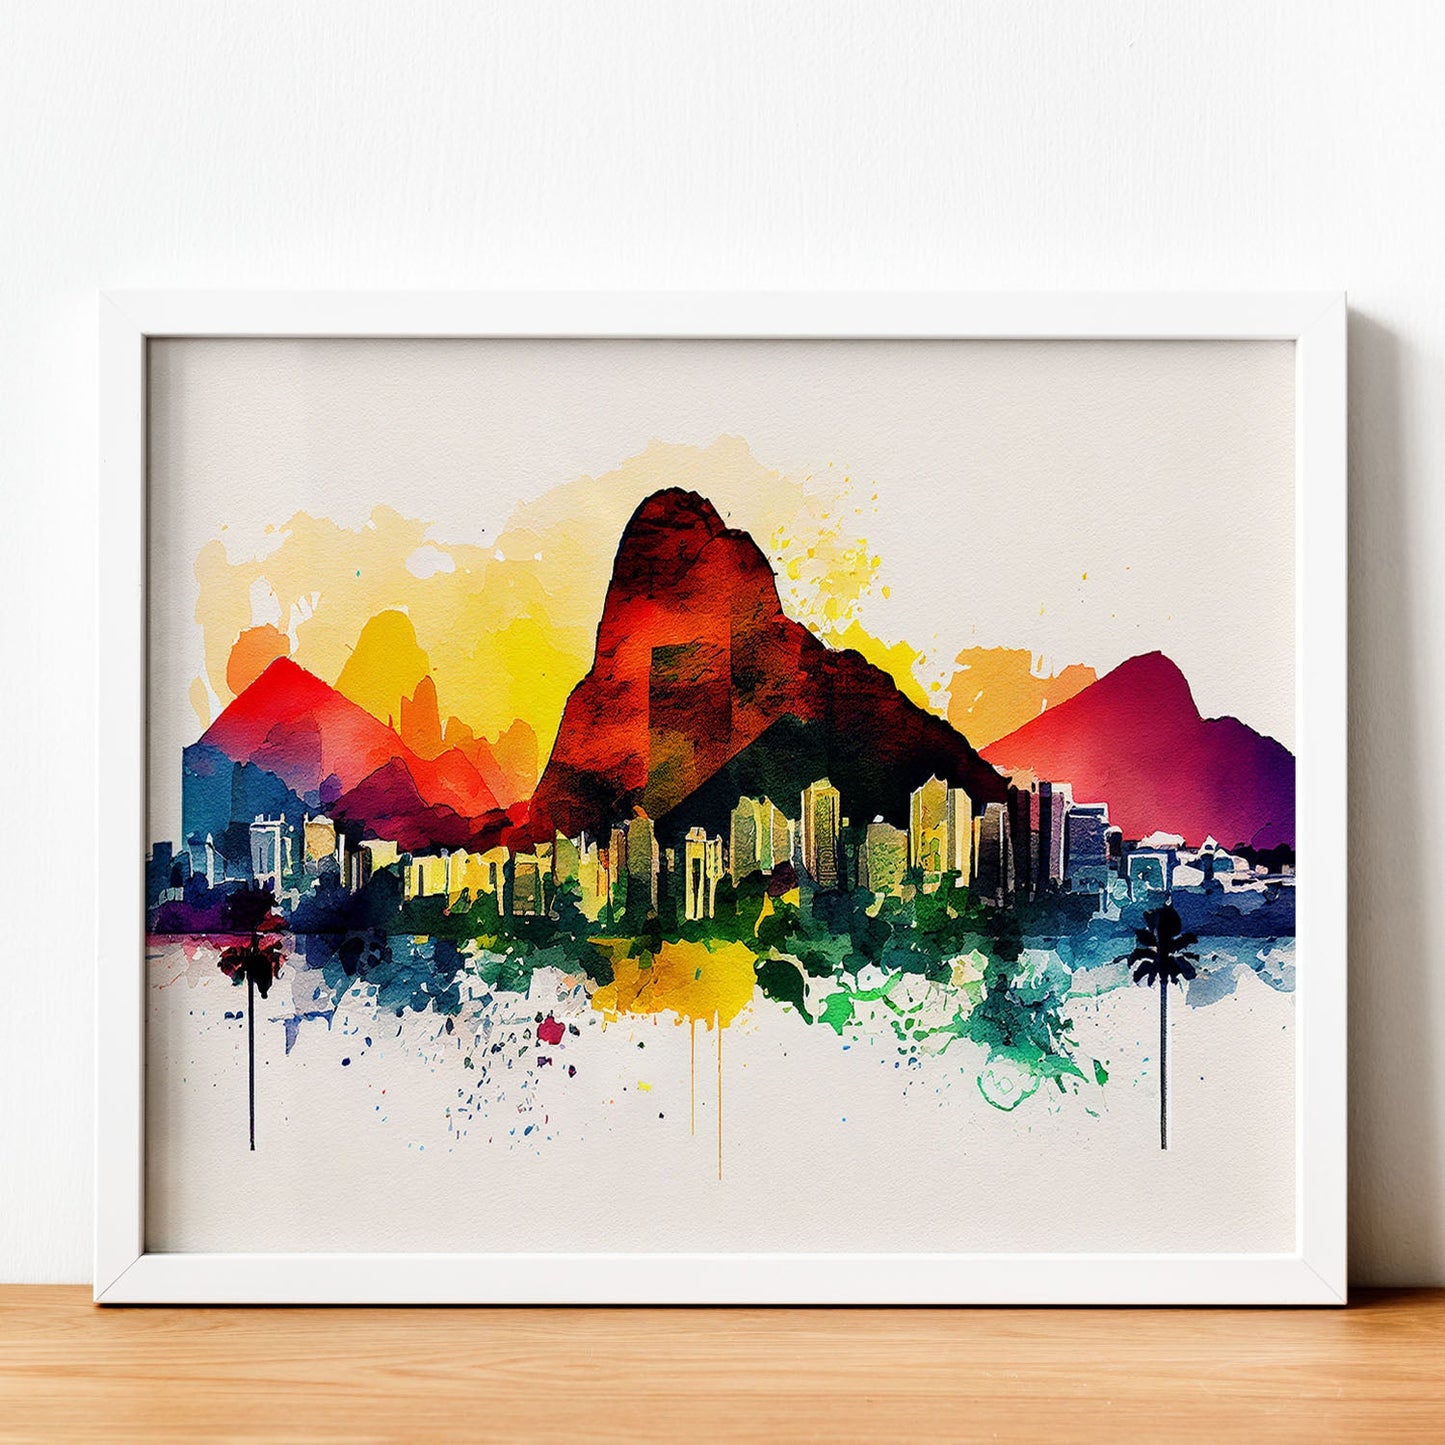 Nacnic watercolor of a skyline of the city of Rio de Janeiro_1. Aesthetic Wall Art Prints for Bedroom or Living Room Design.-Artwork-Nacnic-A4-Sin Marco-Nacnic Estudio SL